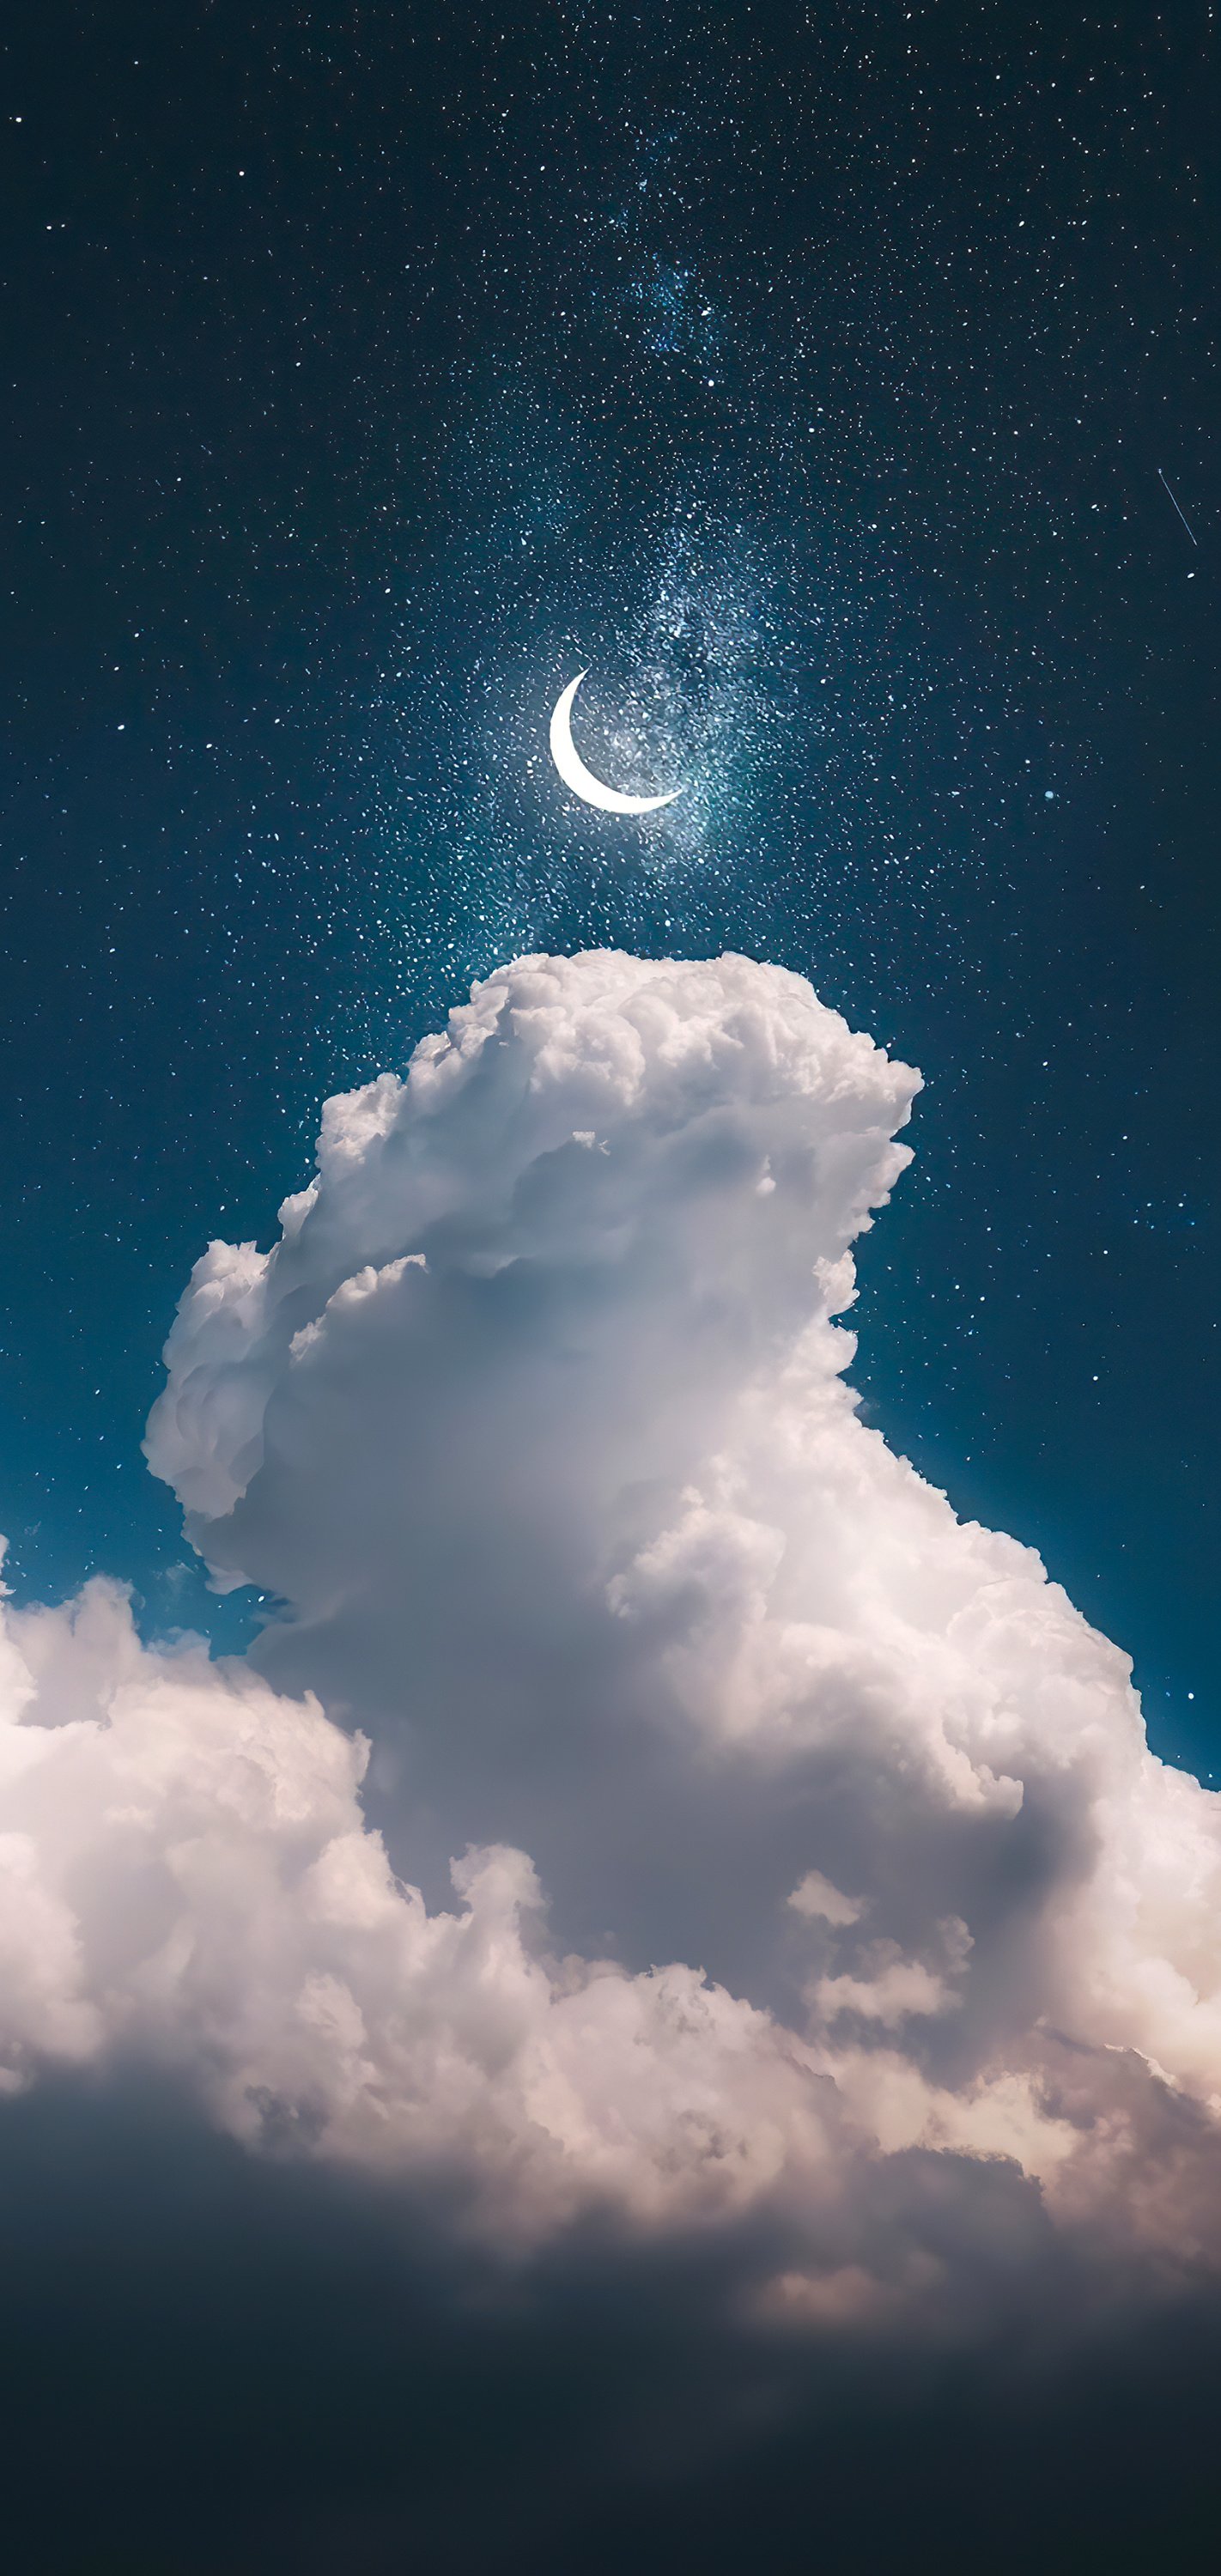 beautiful night sky wallpaper for iPhone to download